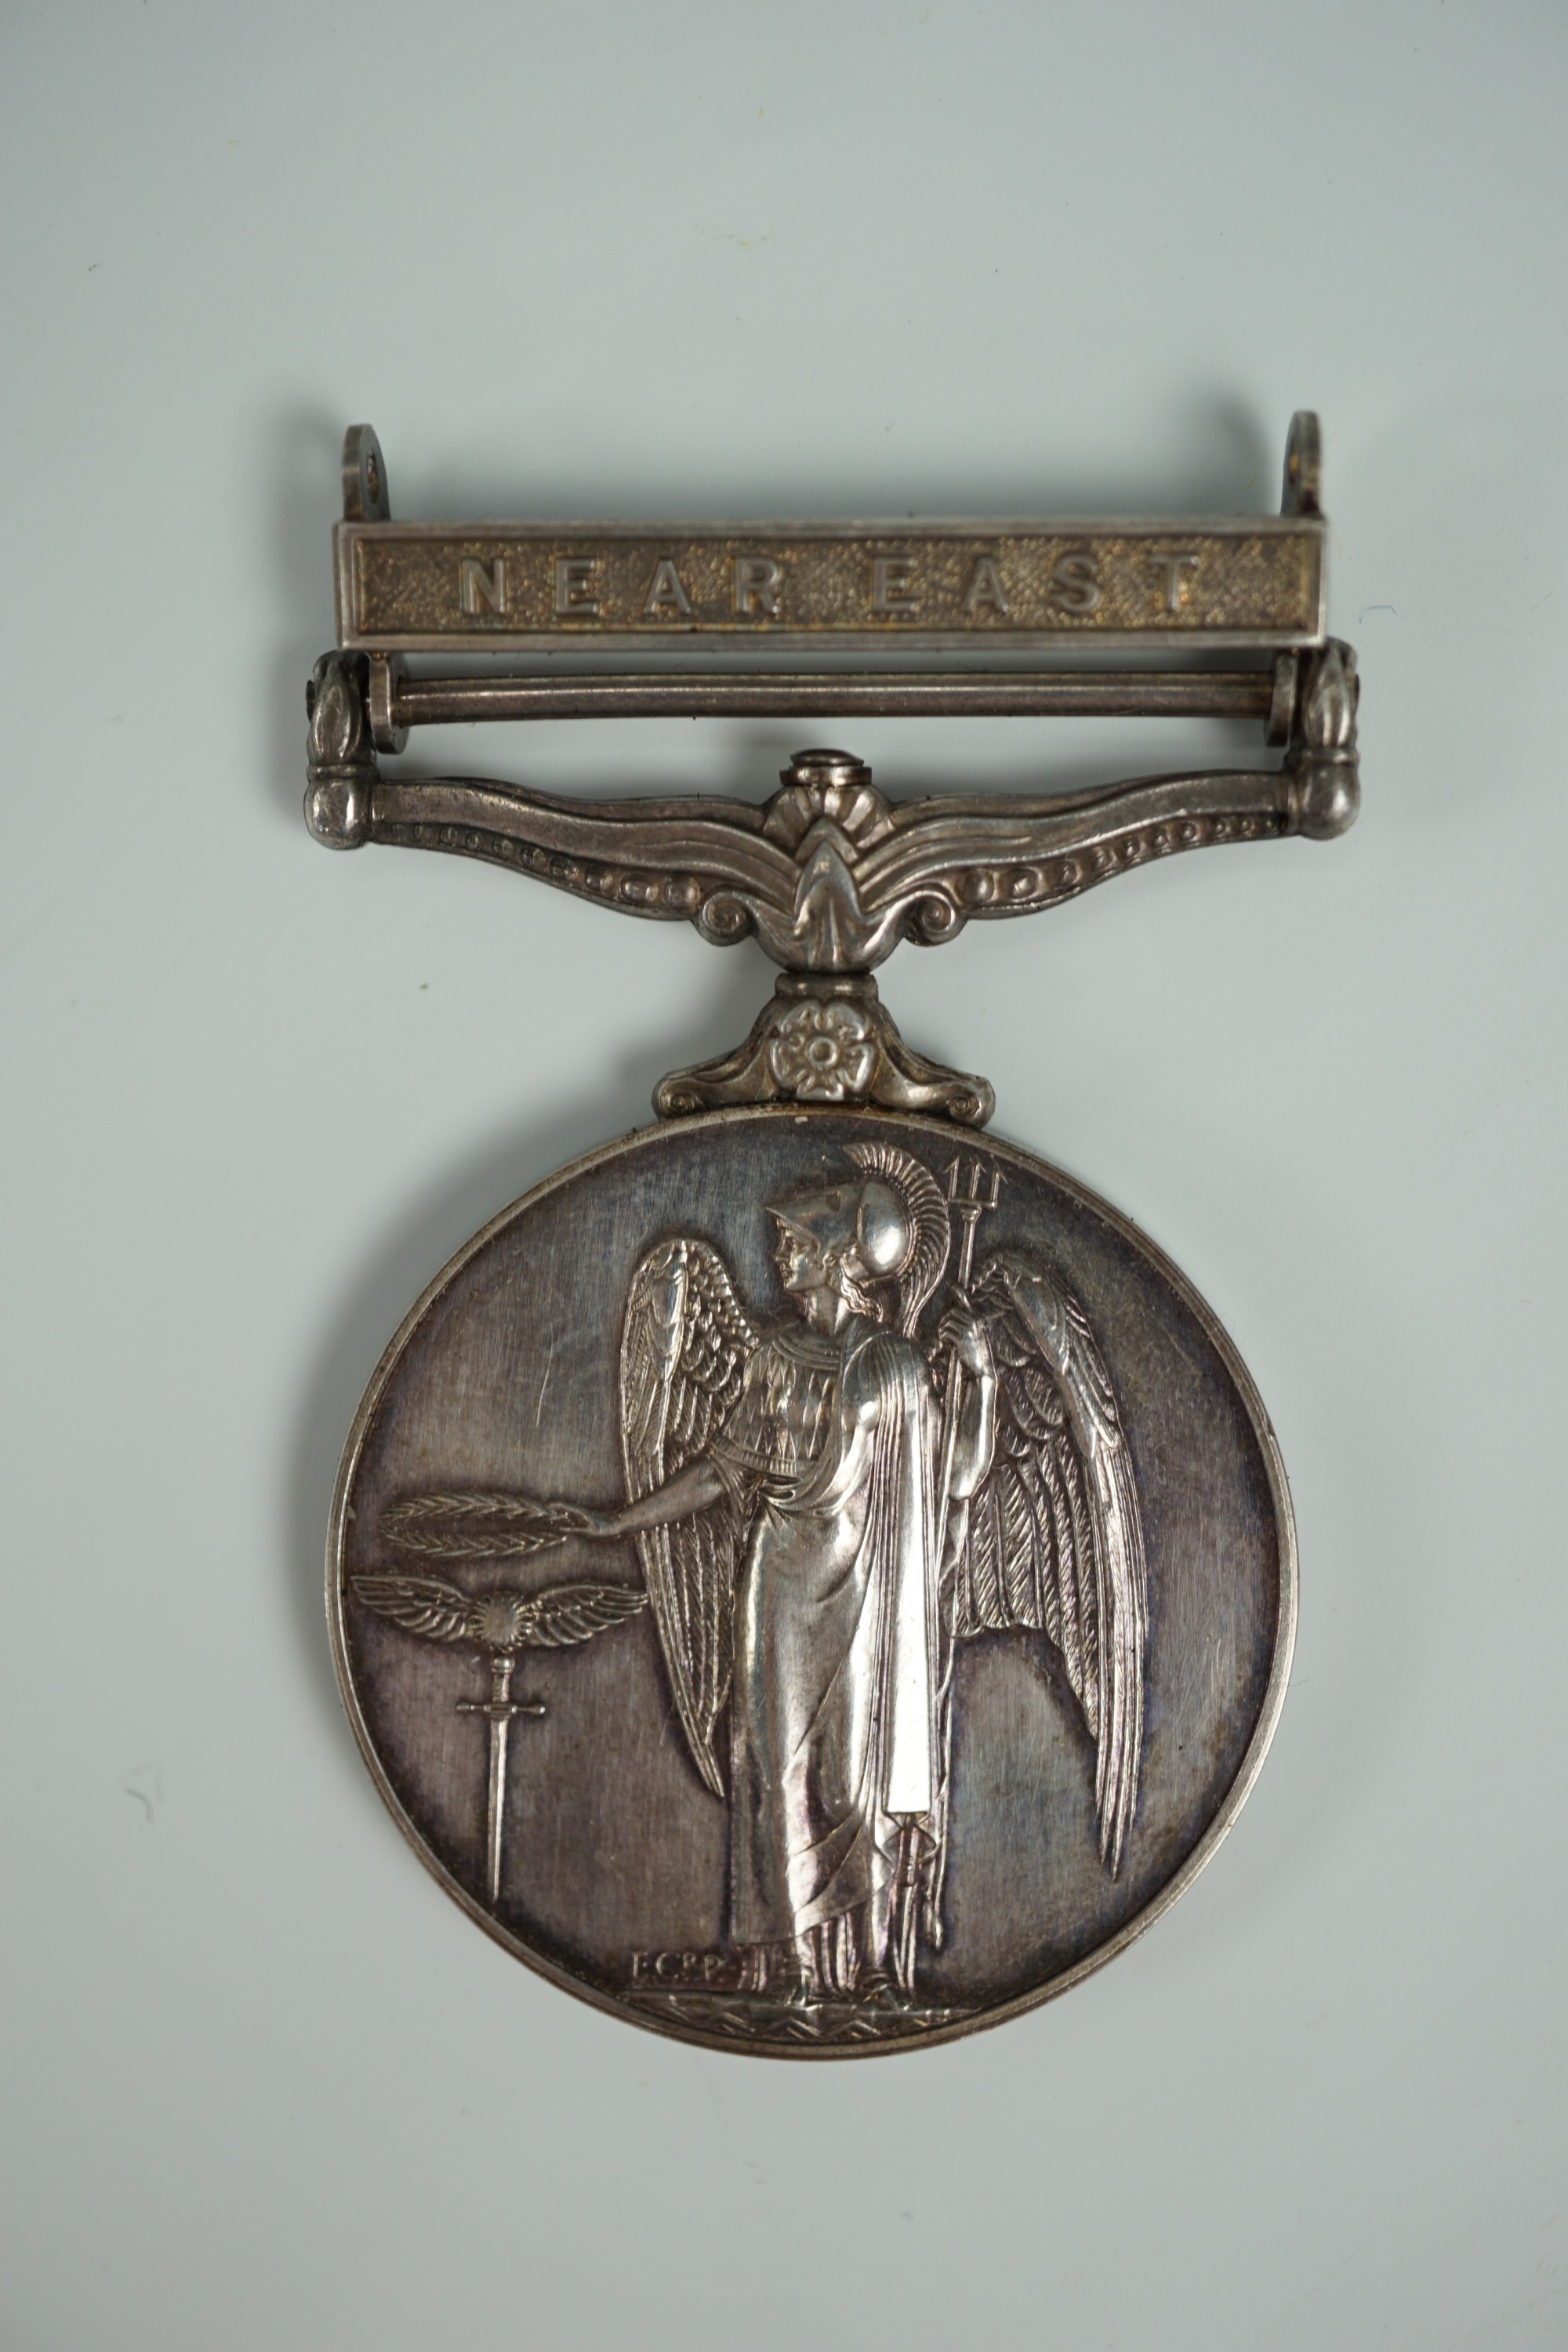 A QEII General Service Medal with Near East clasp to 22752433 Cpl J Mowat, RS - Image 2 of 2